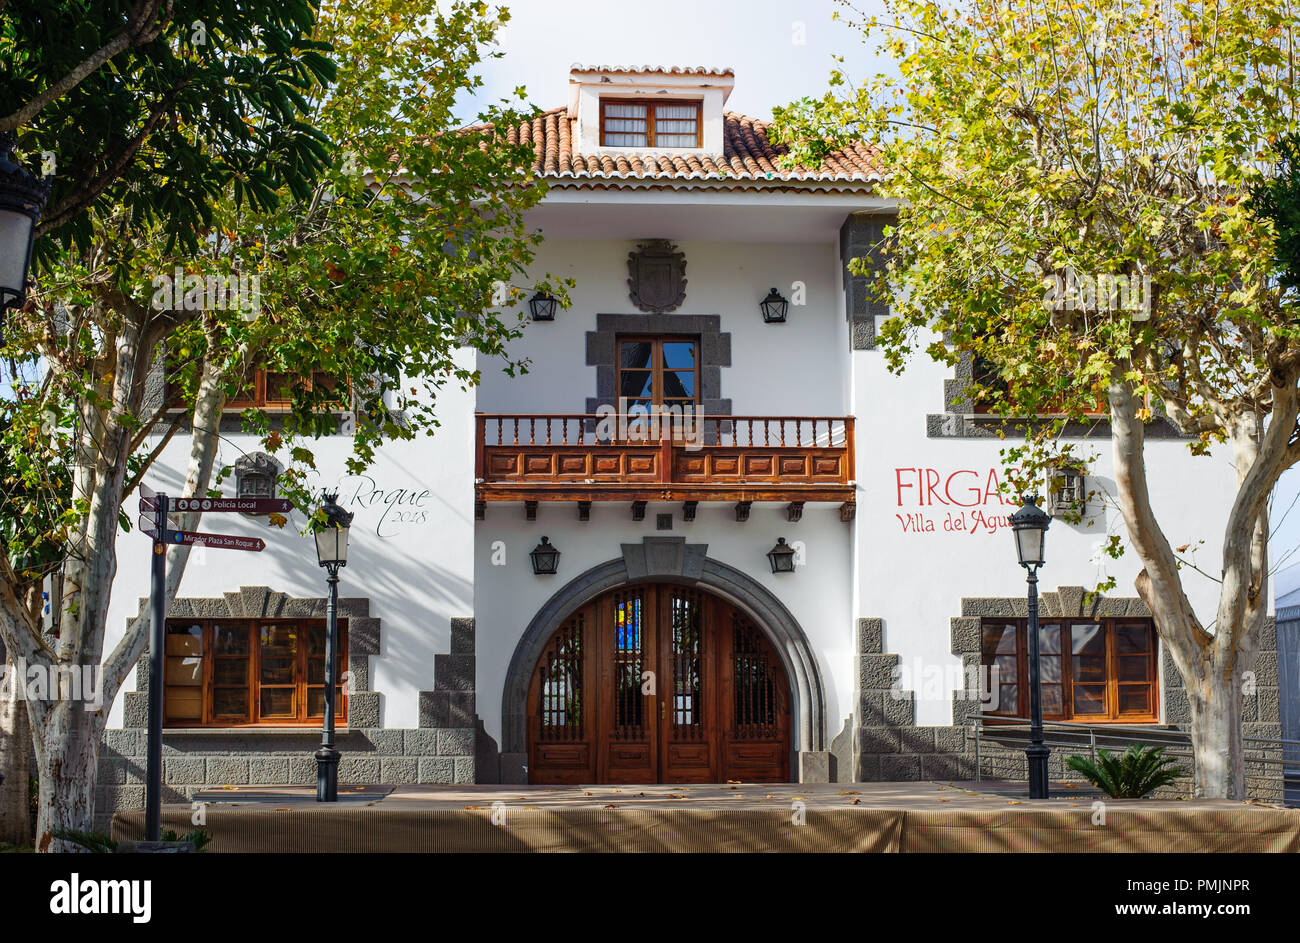 Firgas, Gran Canaria, Spain - 4 January, 2018. view on old Villa Del Agua, on San Roque square in Firgas village, gran Canaria island, Spain Stock Photo